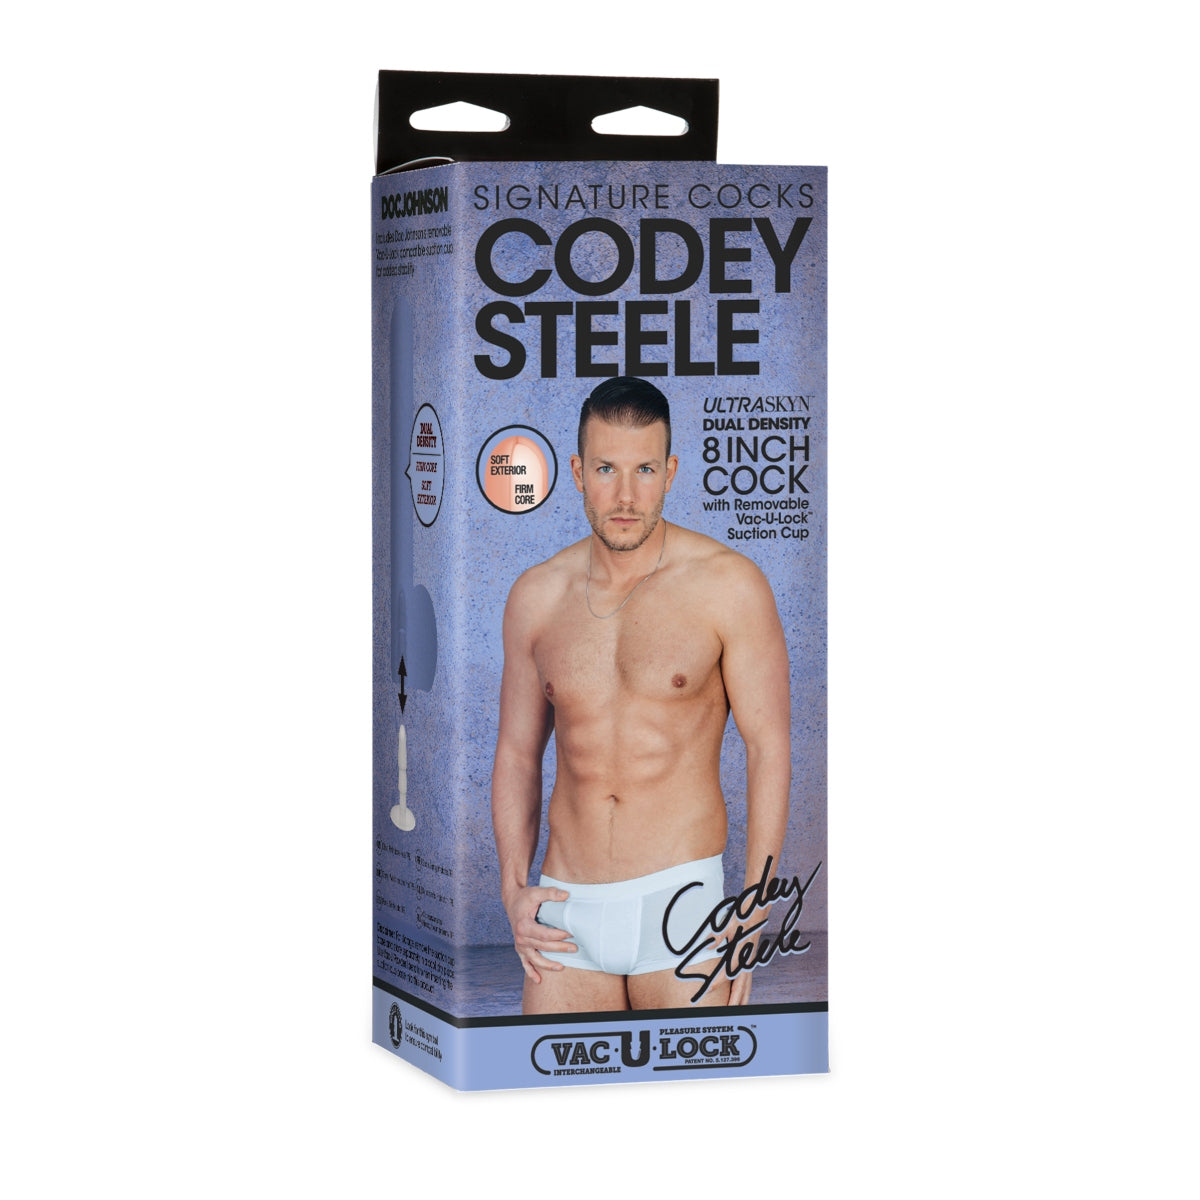 Signature Cocks | Codey Steele 8 inch Ultraskyn Cock with Removable Vac U Lock Suction Cup – Vanilla